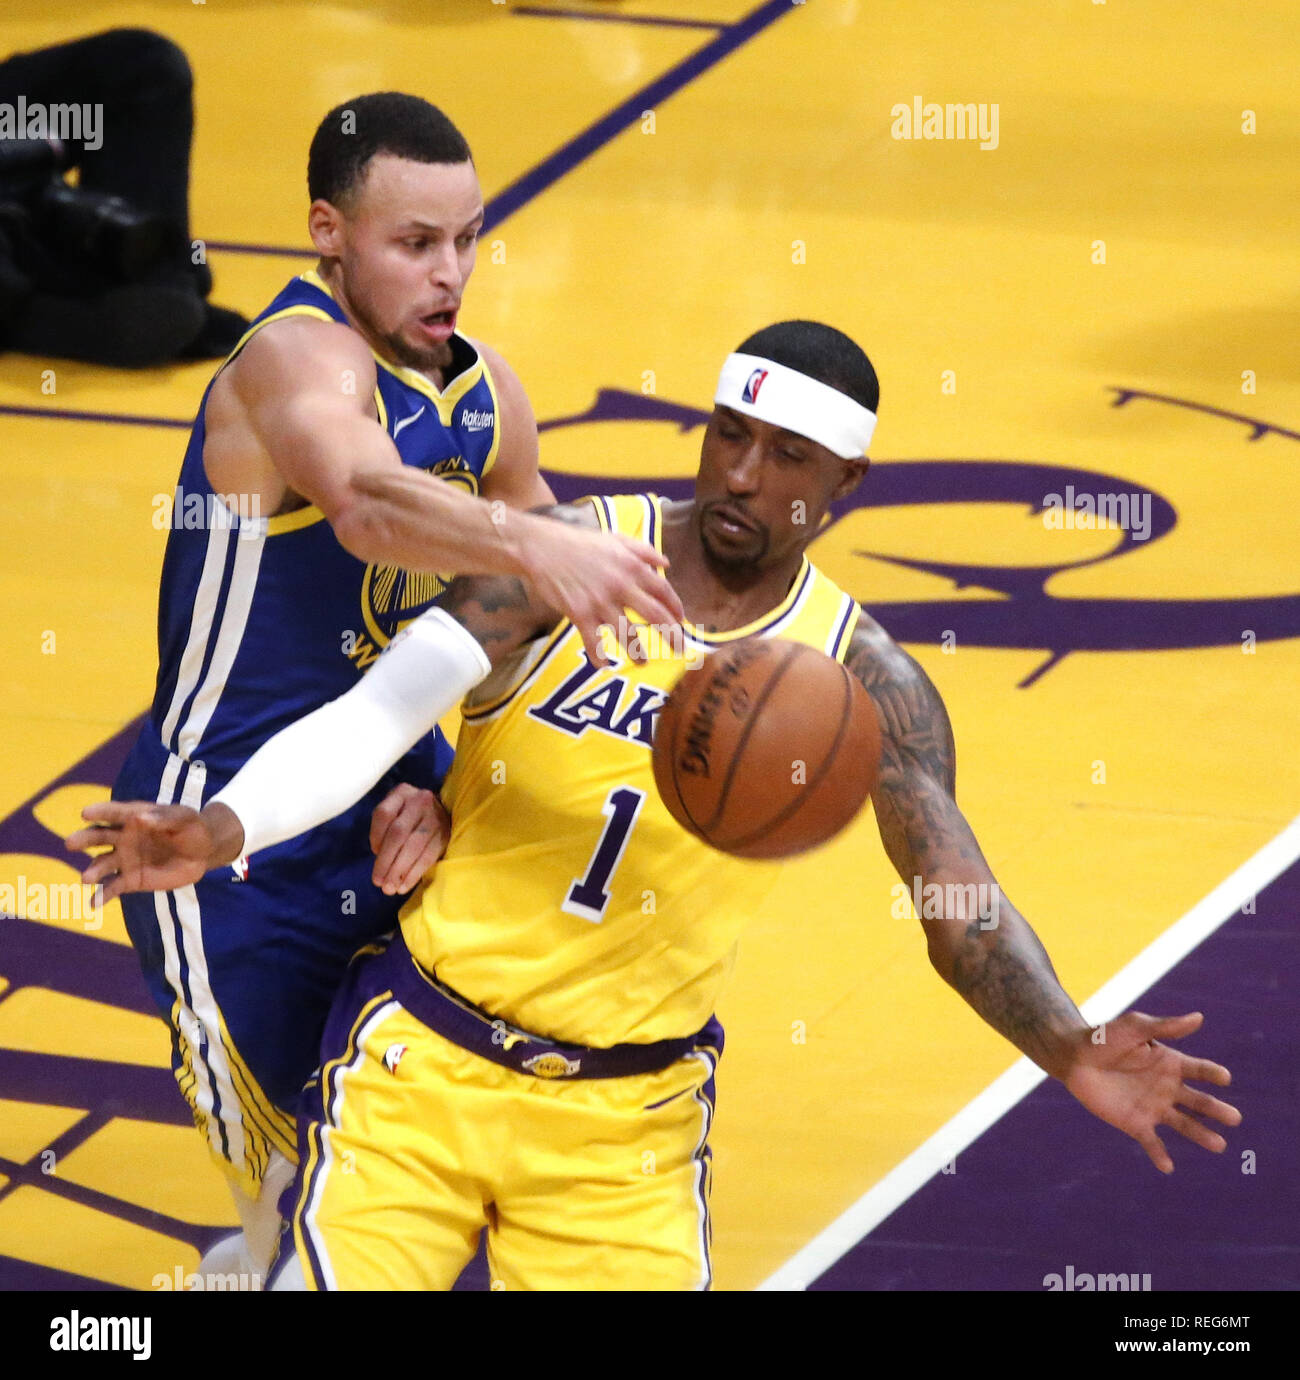 Los Angeles, California, USA. 21st Jan, 2019. Golden State Warriors' Stephen Curry (30) and Los Angeles Lakers' Kentavious Caldwell-Pope (1) battle for a ball during an NBA basketball game between Los Angeles Lakers and Golden State Warriors Monday, Jan. 21, 2019, in Los Angeles. Credit: Ringo Chiu/ZUMA Wire/Alamy Live News Stock Photo